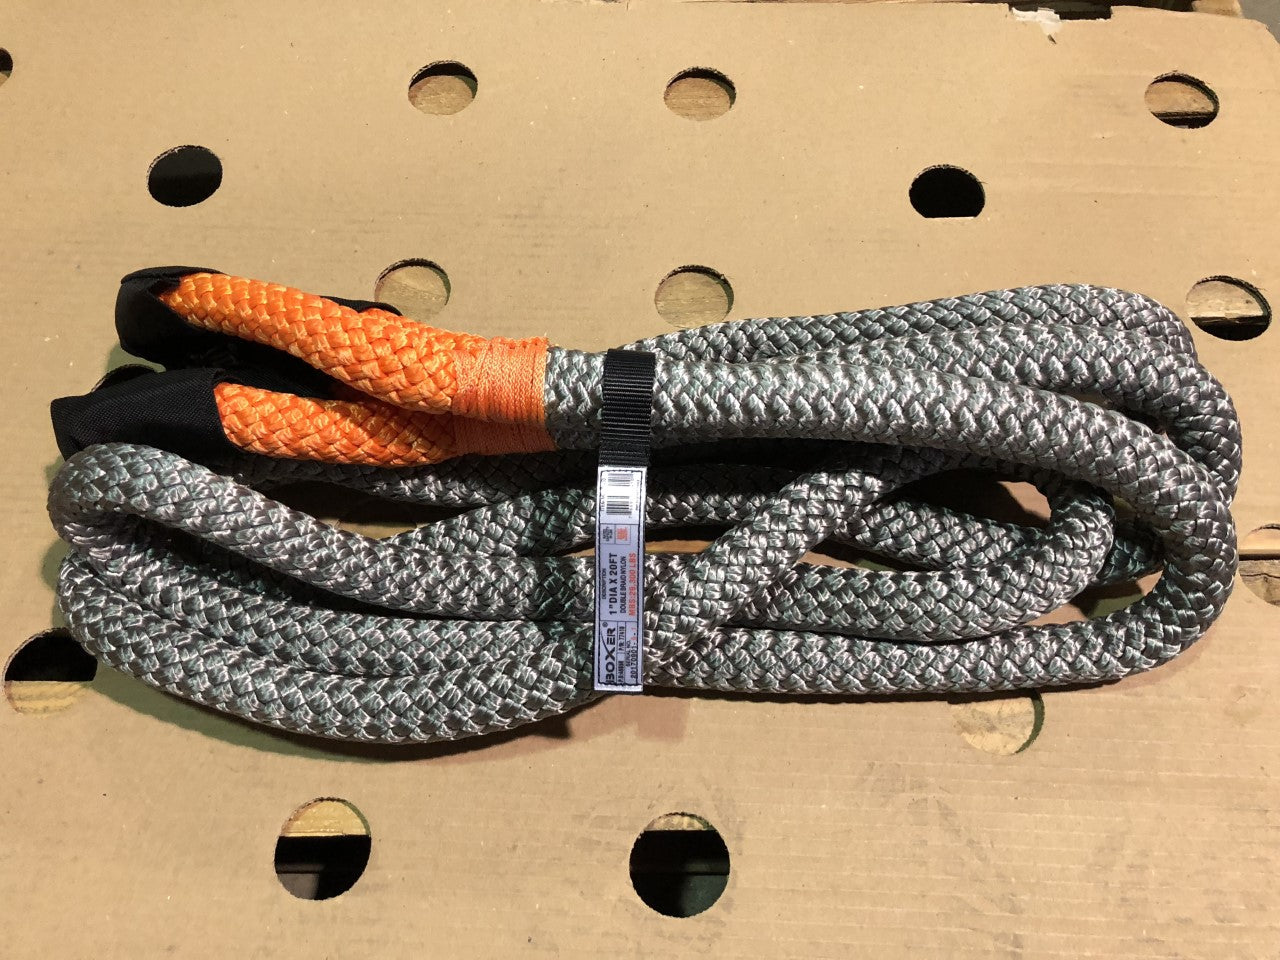 Boxer 1" x 20' 29300 Lb. MBS Kinetic Recovery Rope #77410